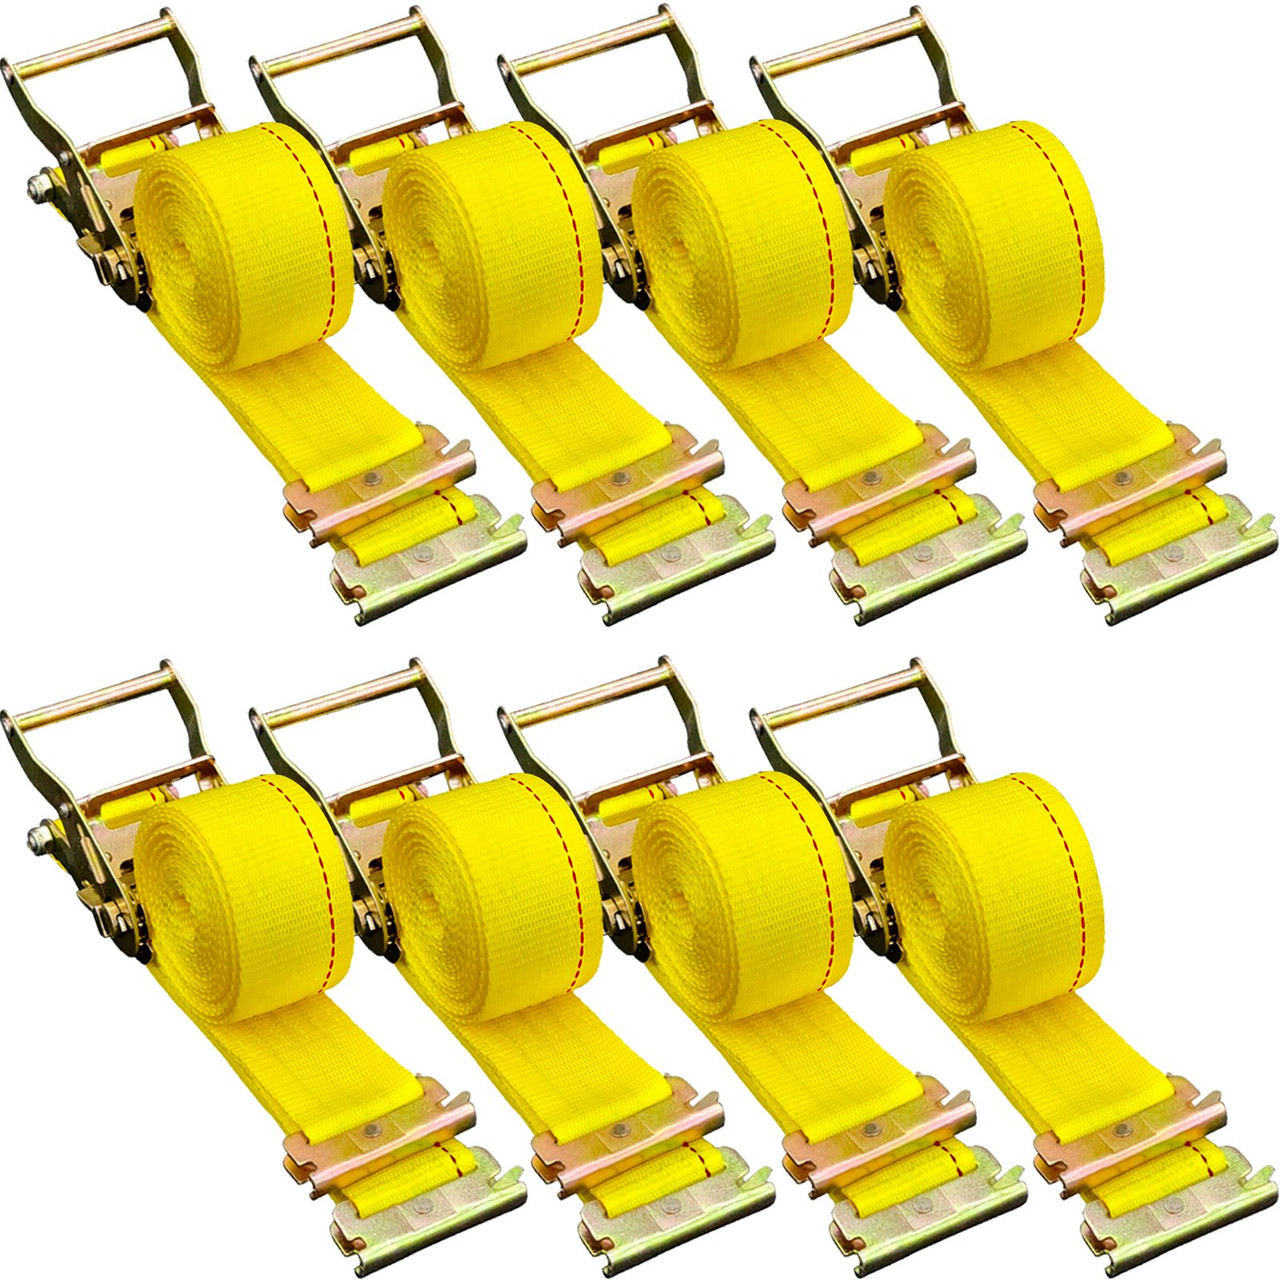 4 Pack 5' E Track Tie Down Rails System Power Coated E-Tracks for Cargo  Trailers